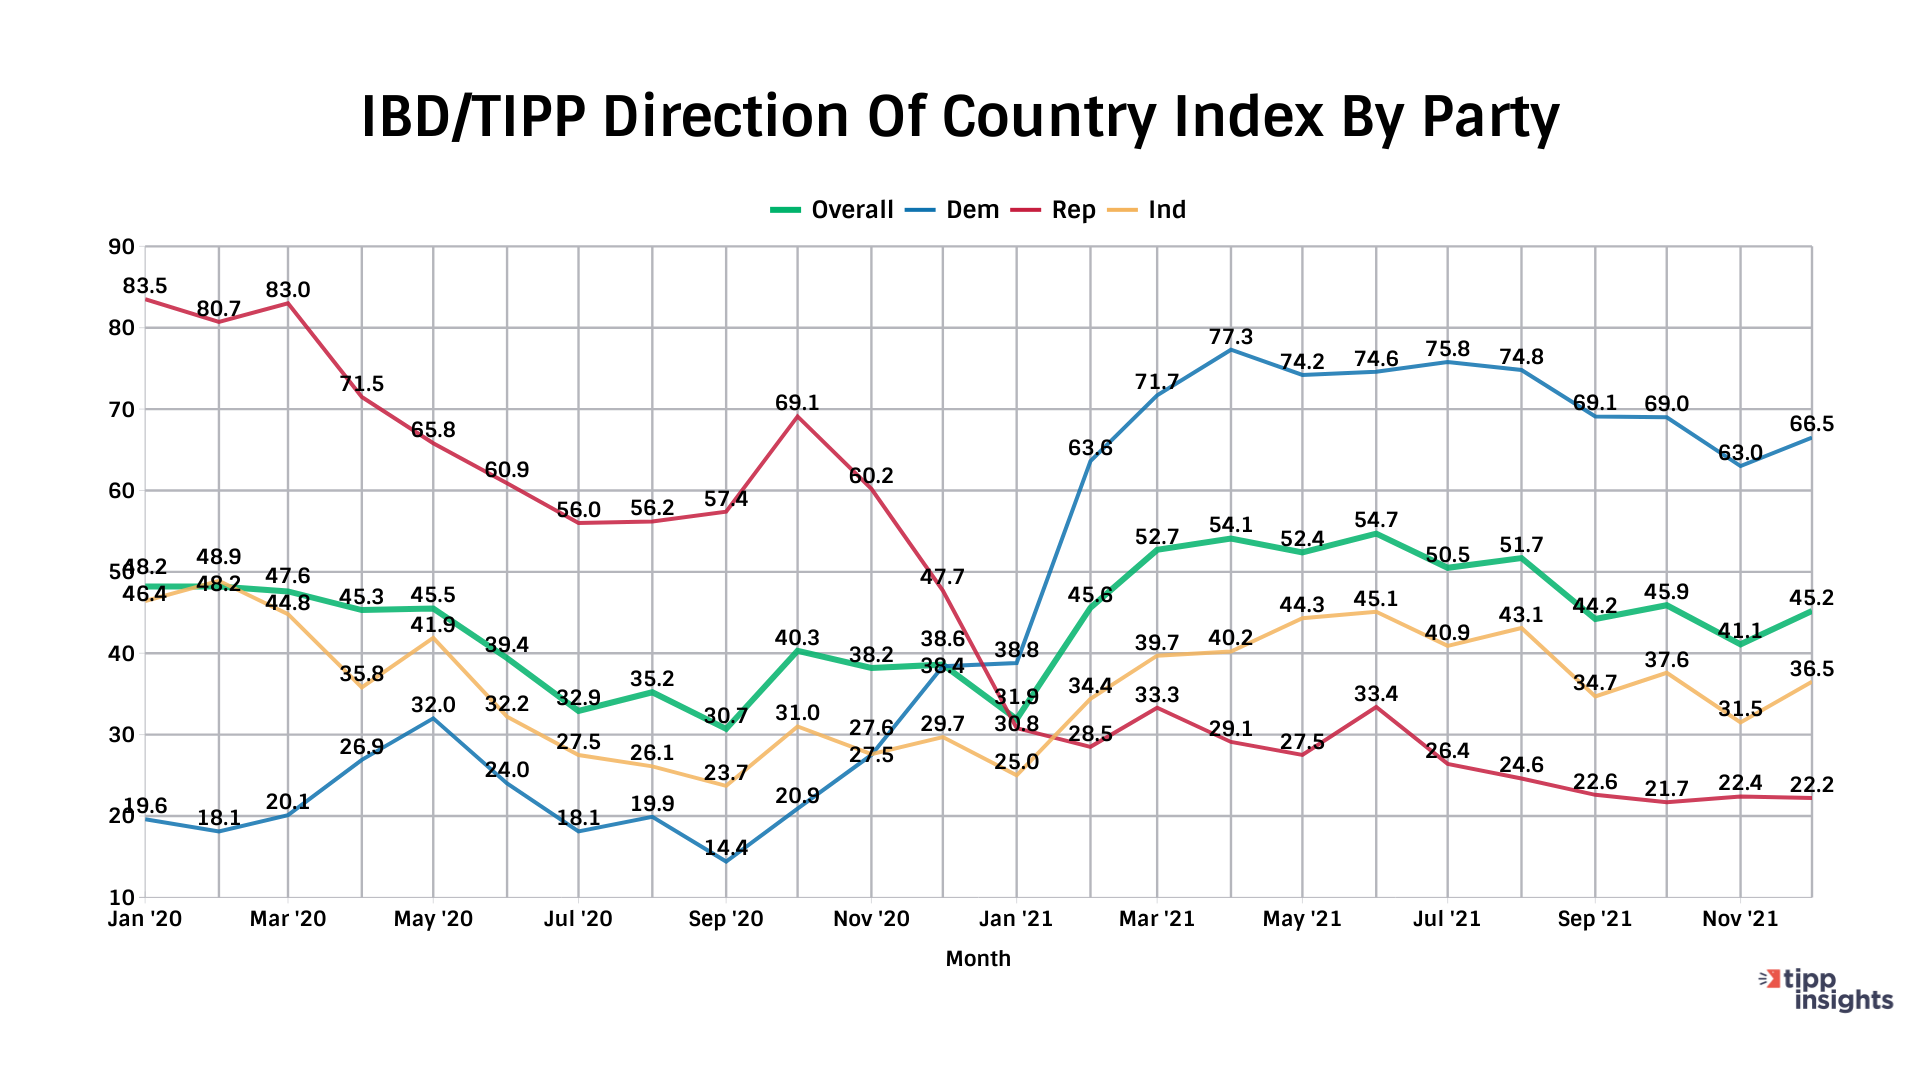 IBD/TIPP Poll Results: Direction of country index by party